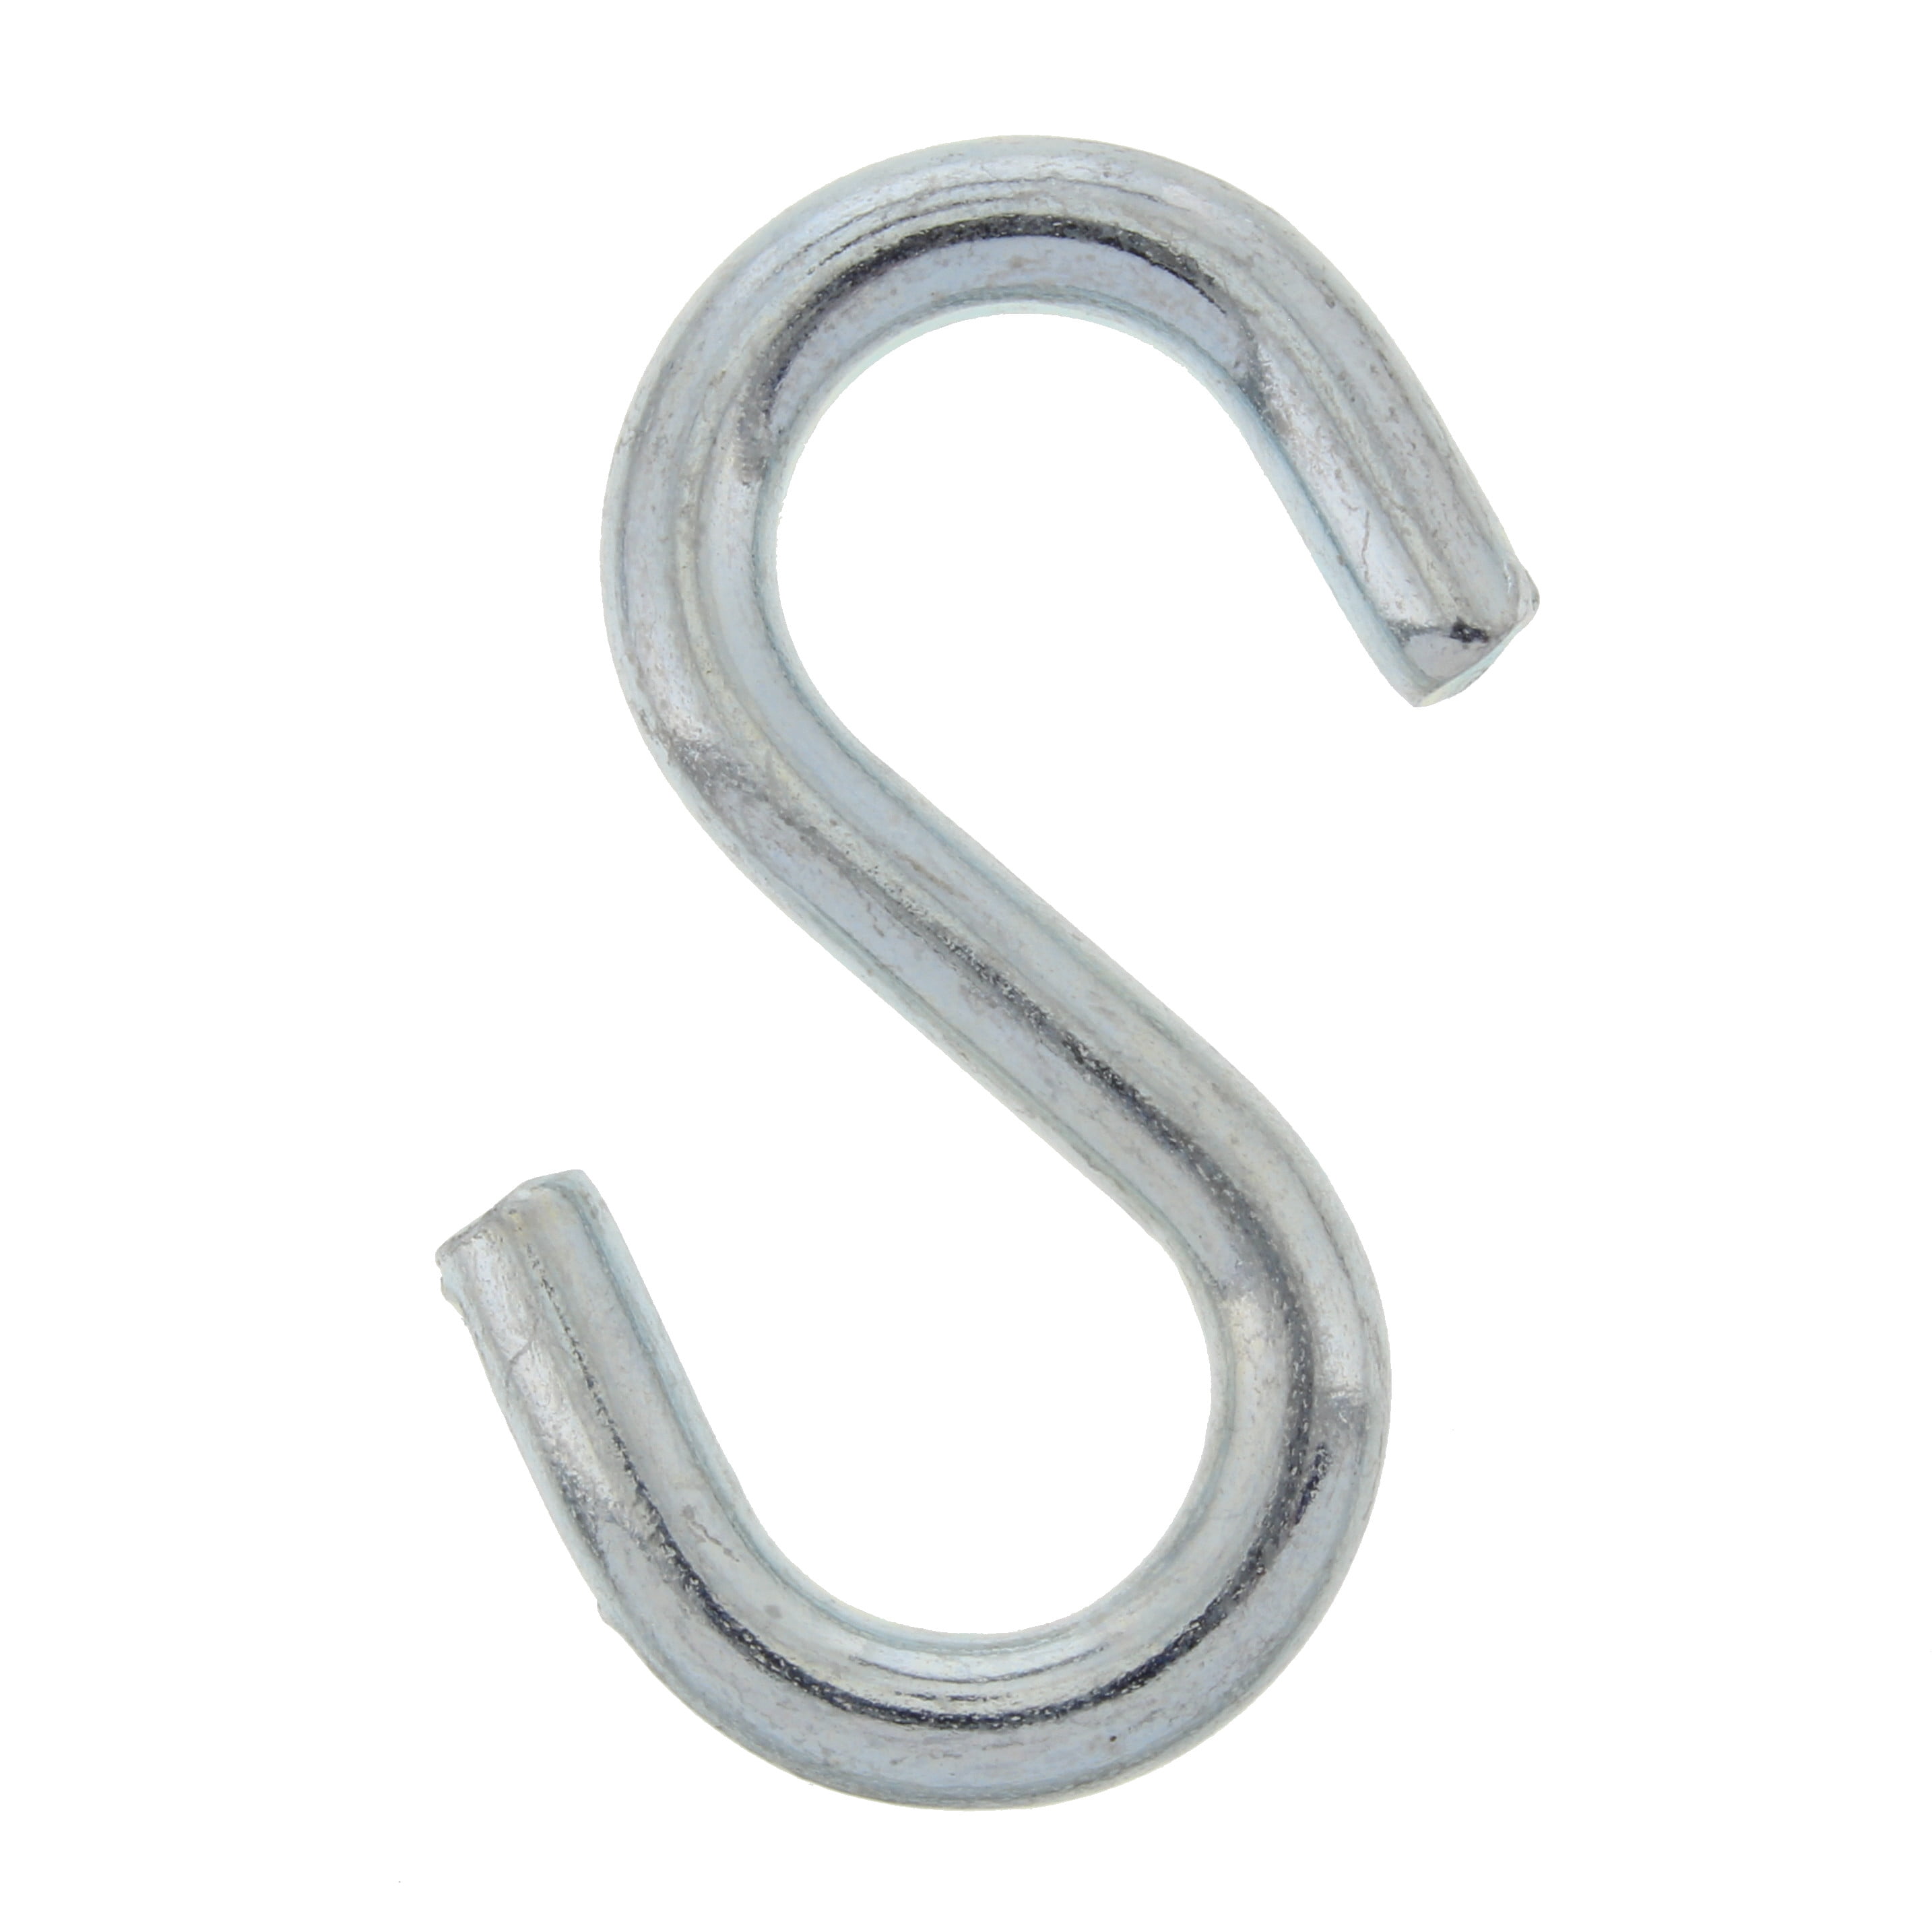 Bulldog Hardware #7 1-1/2 in. S Hook, Zinc Plated, Pack